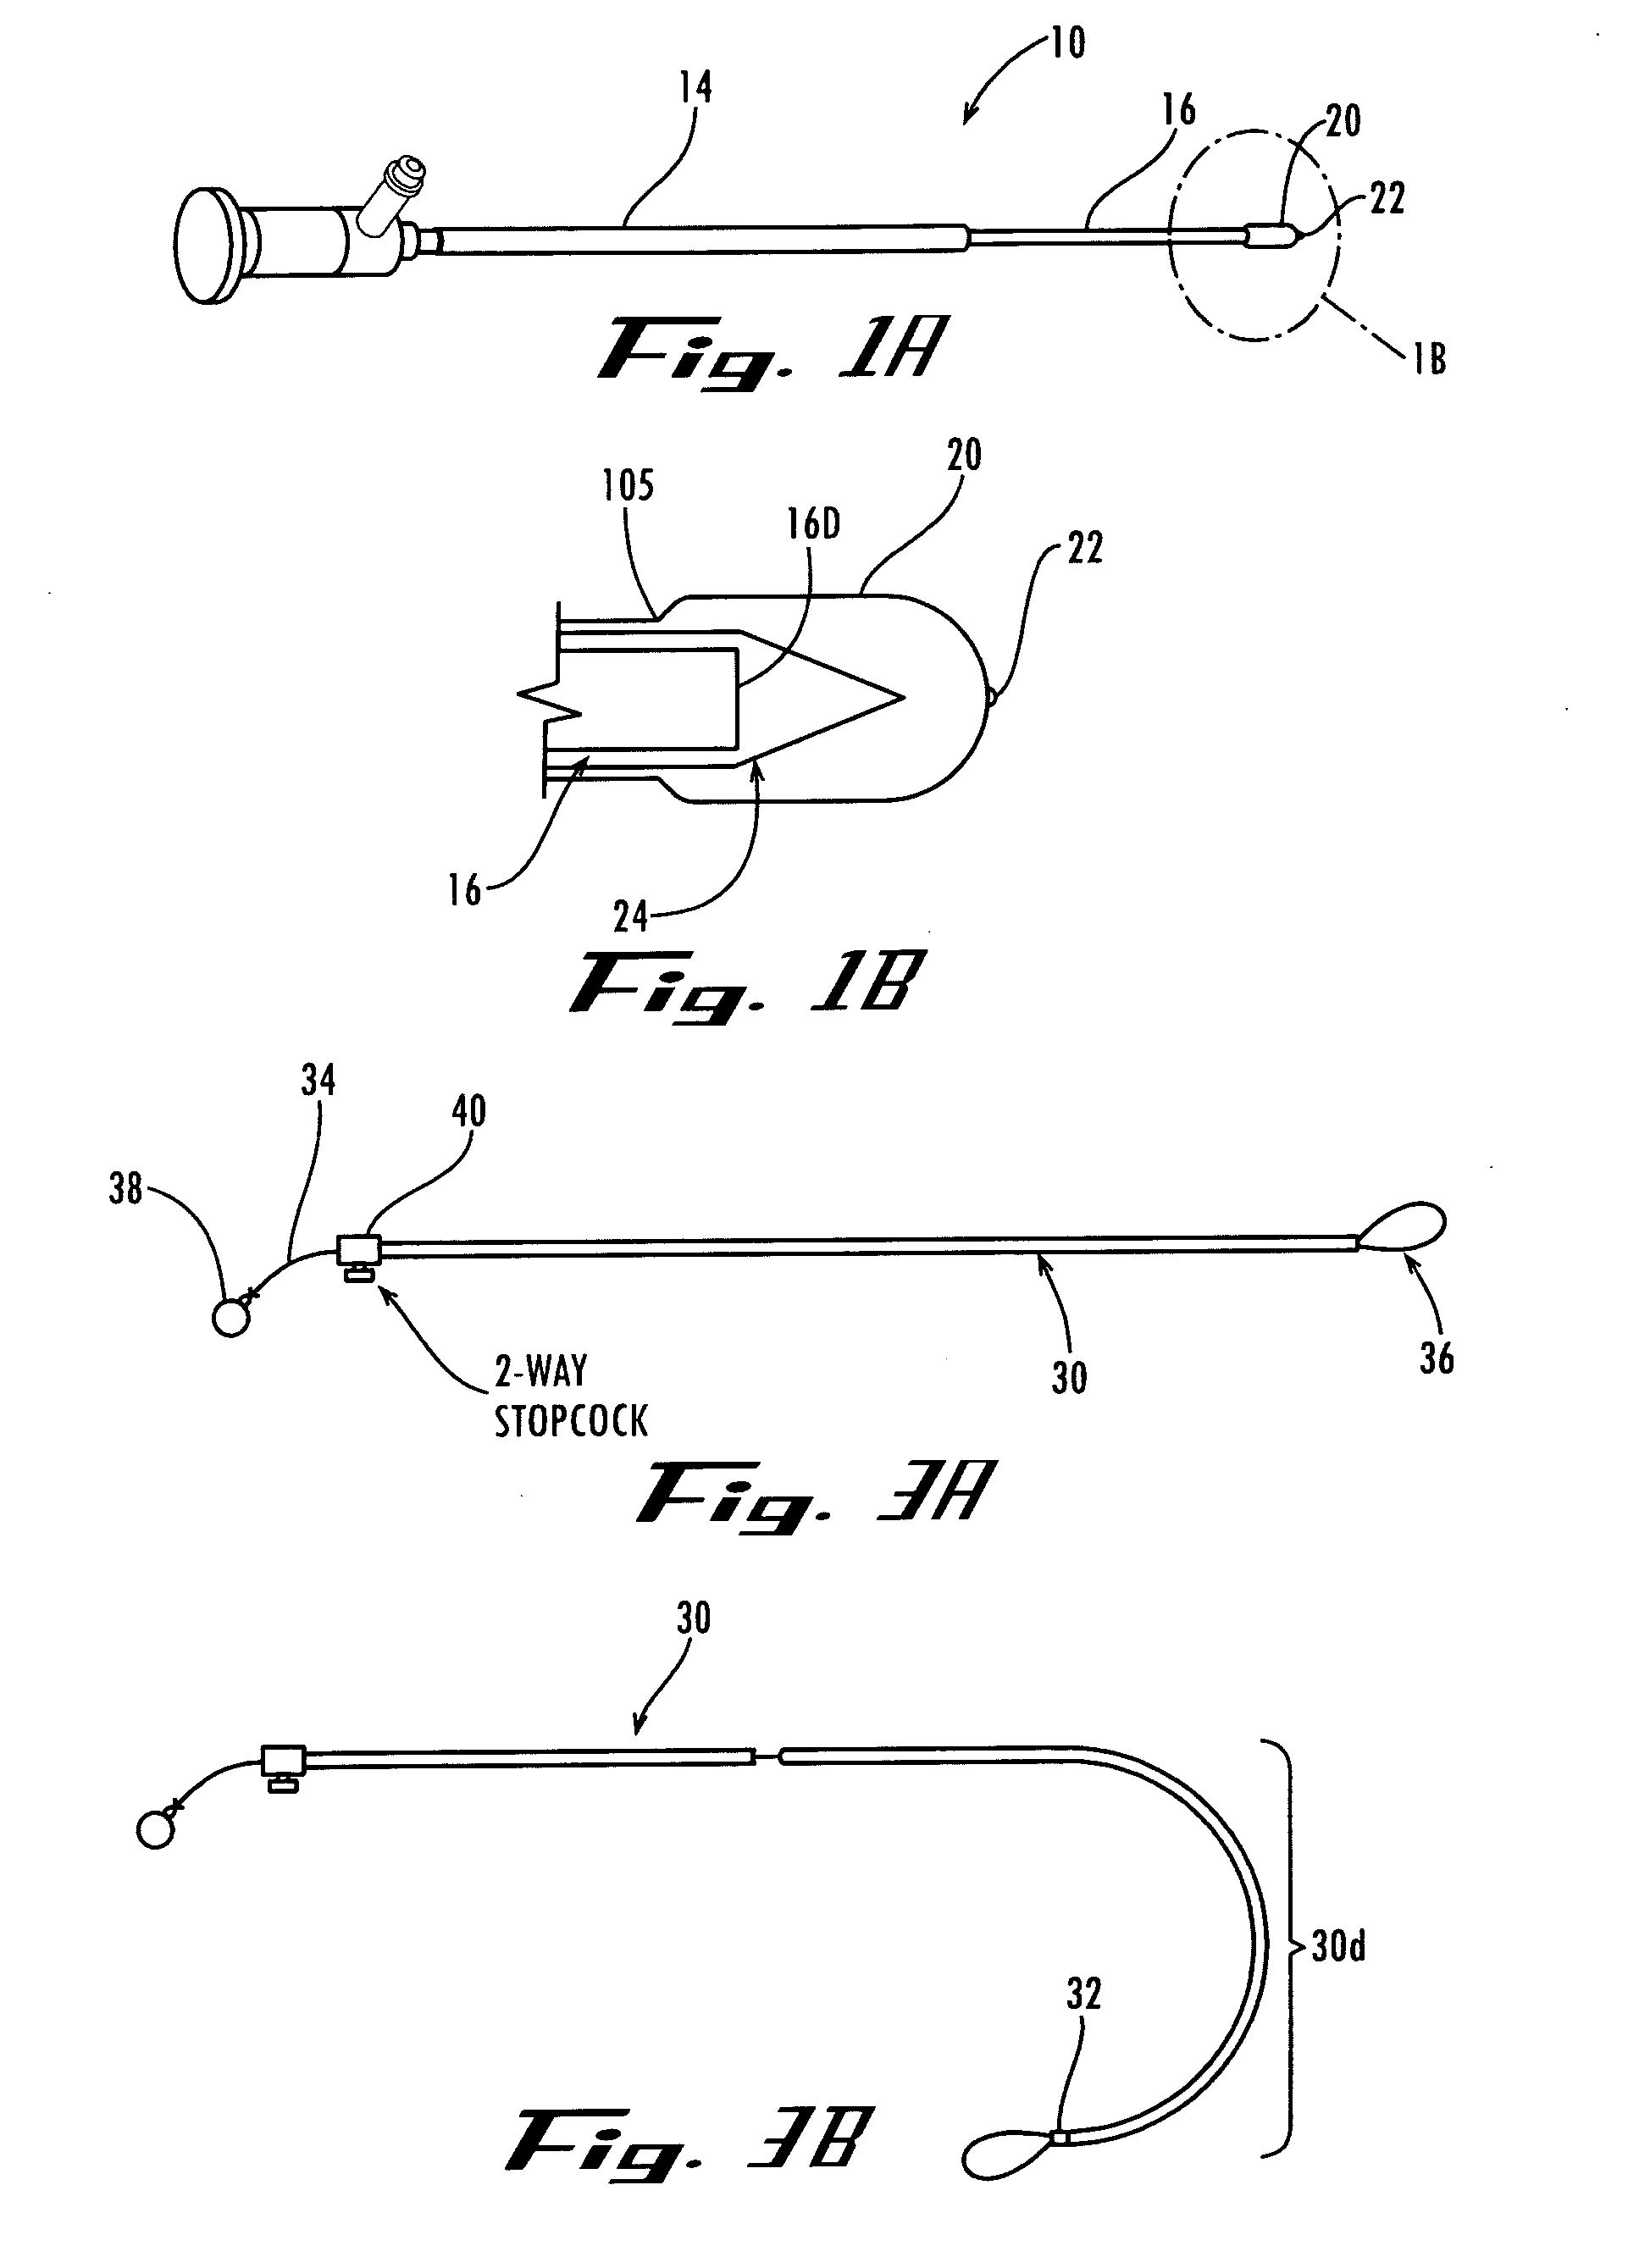 Apparatus and methods for performing ablation